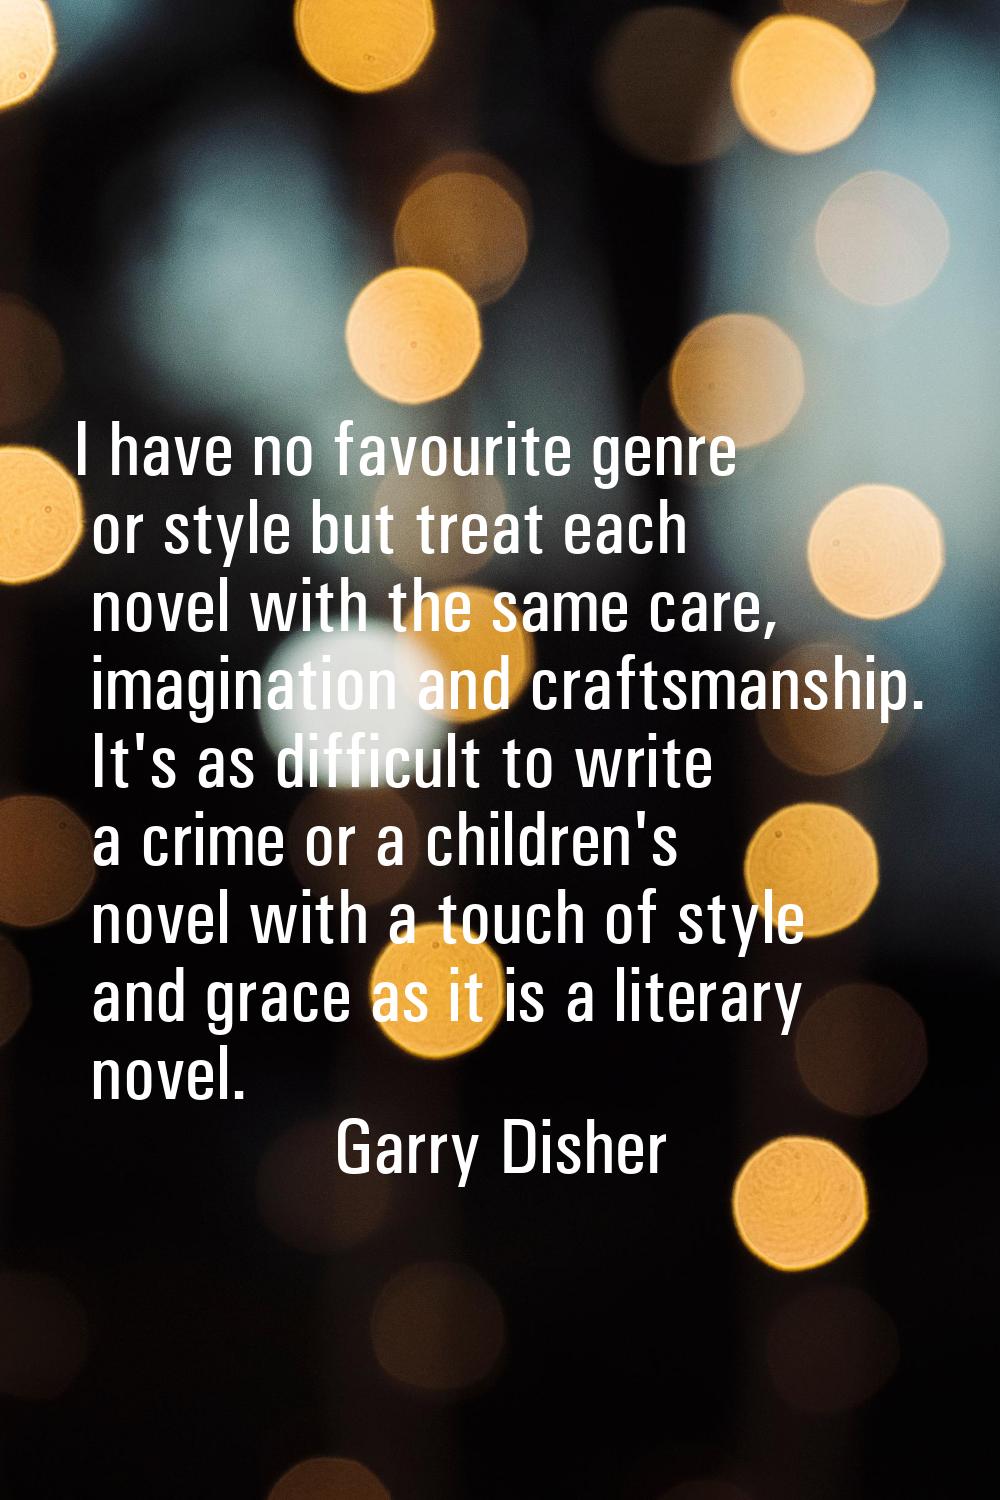 I have no favourite genre or style but treat each novel with the same care, imagination and craftsm